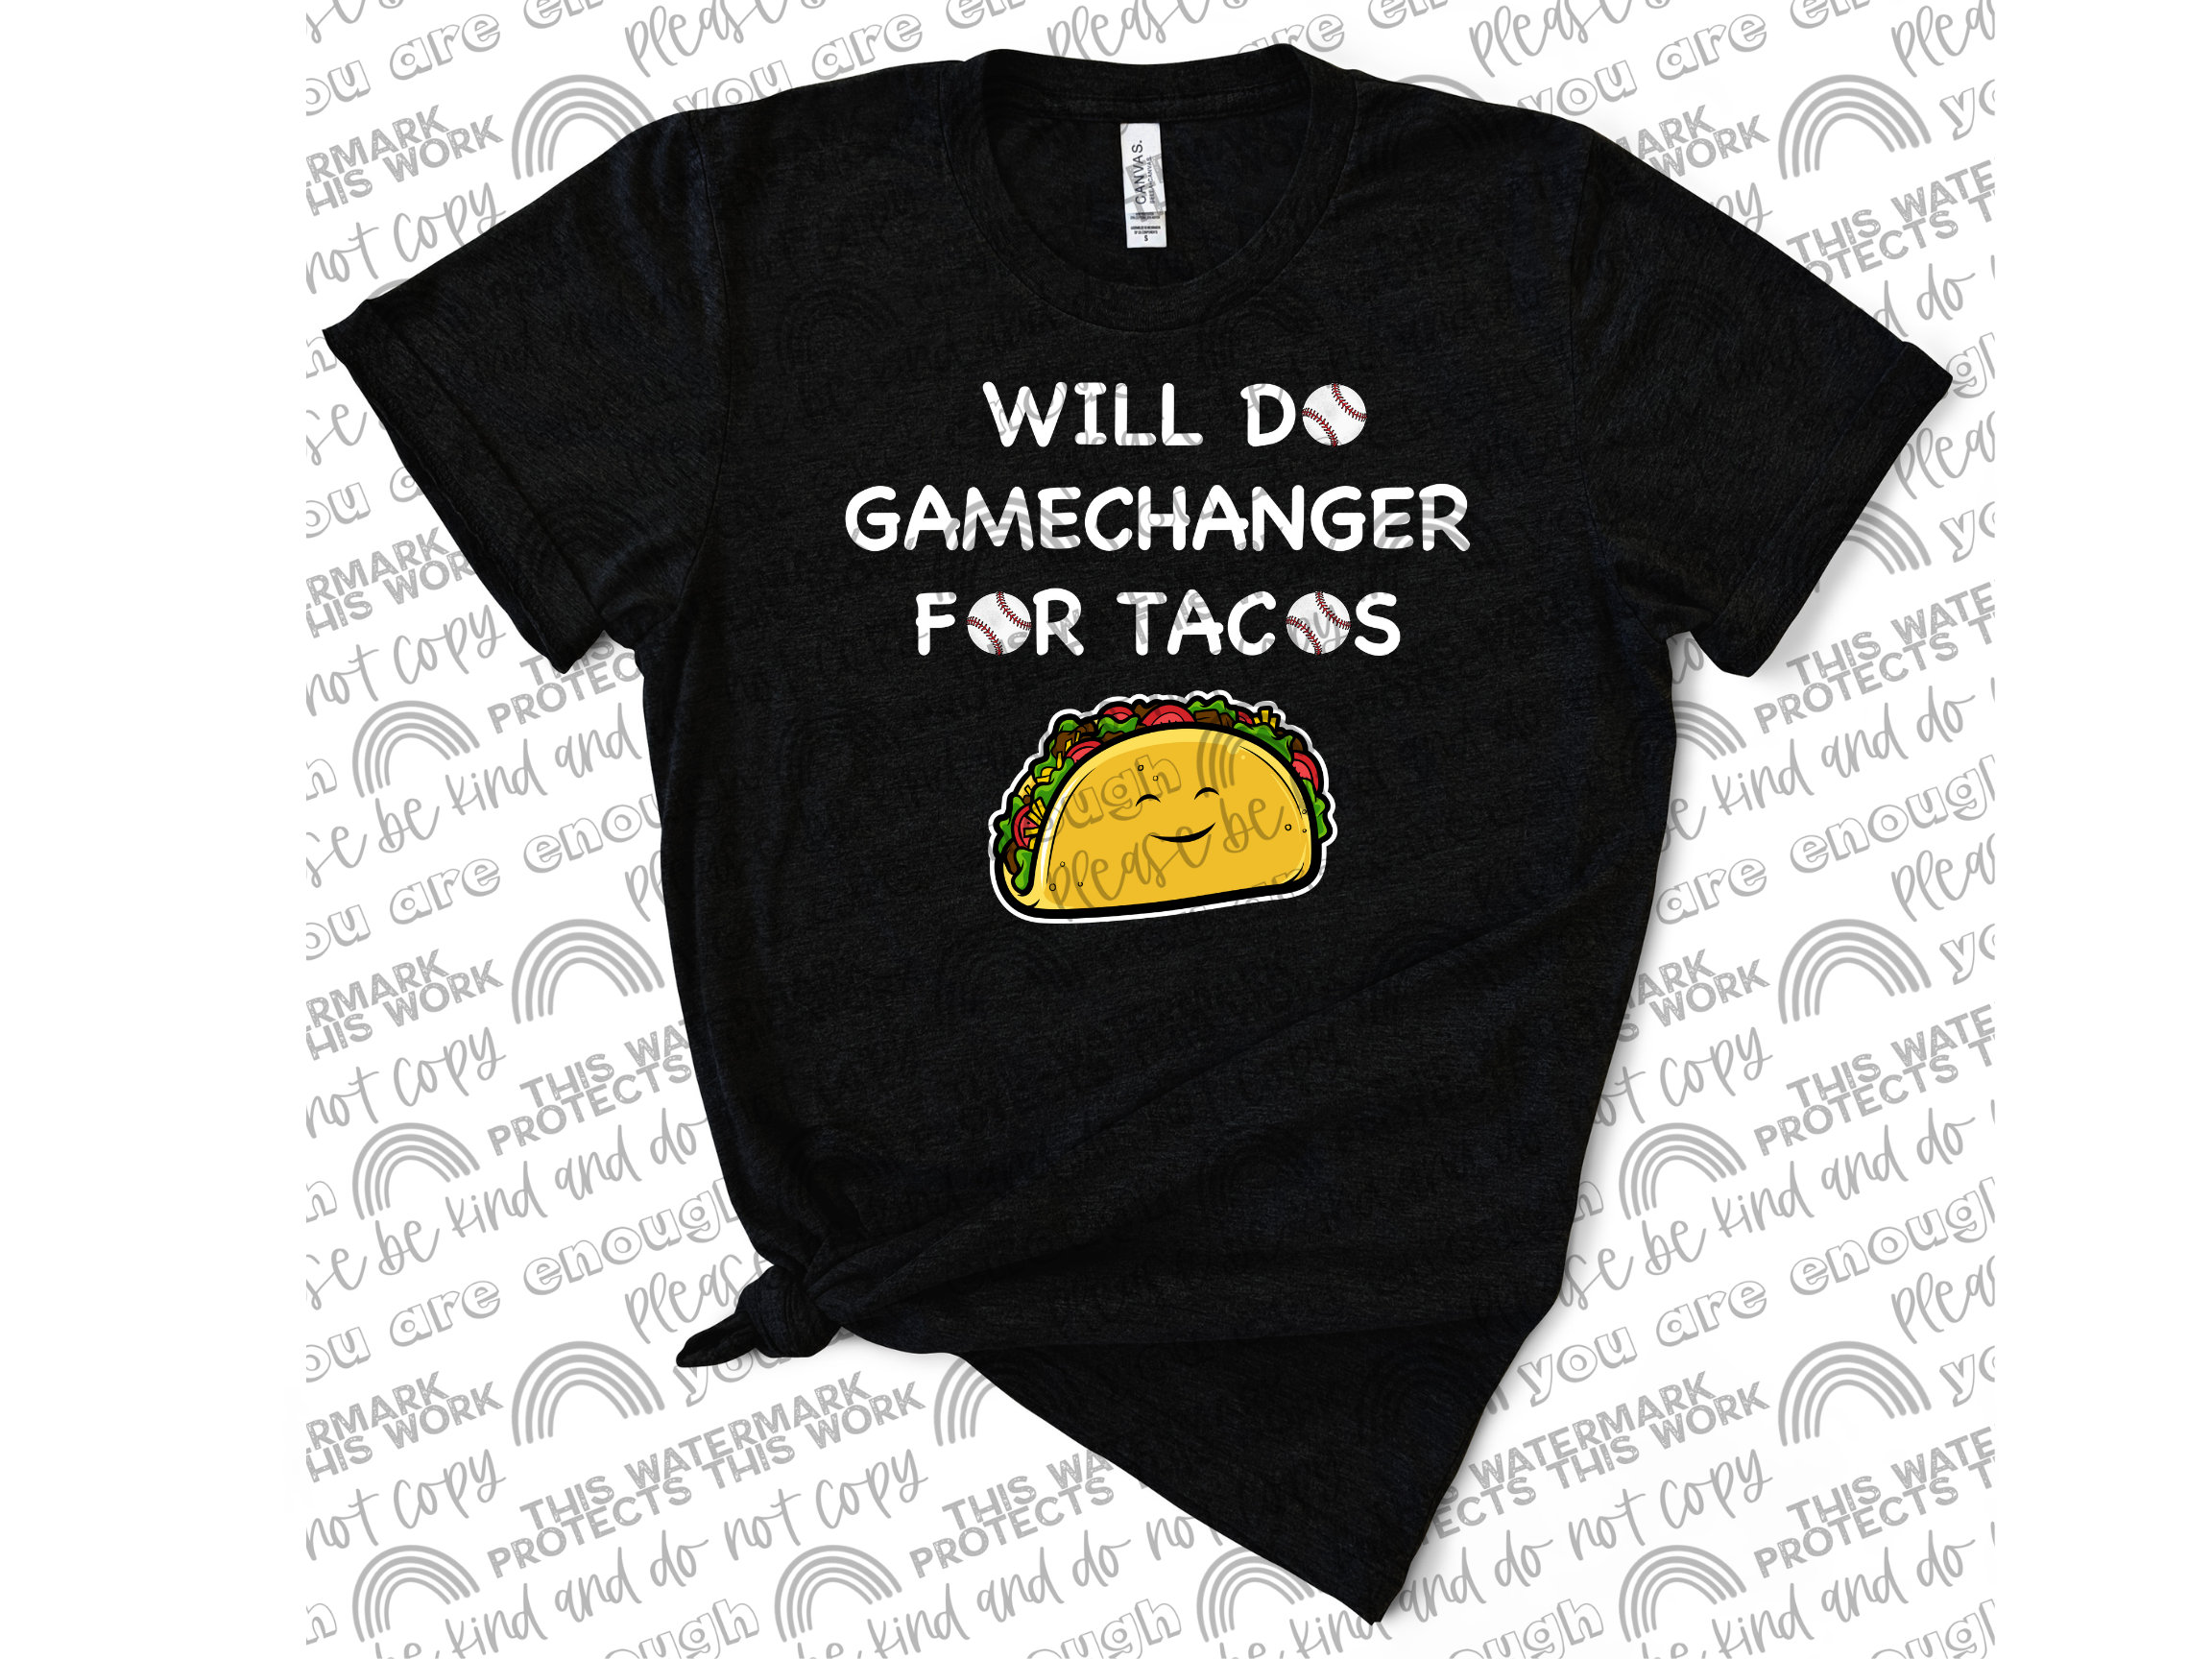 THE BEST TEES IN THE GAME – GAME CHANGERS